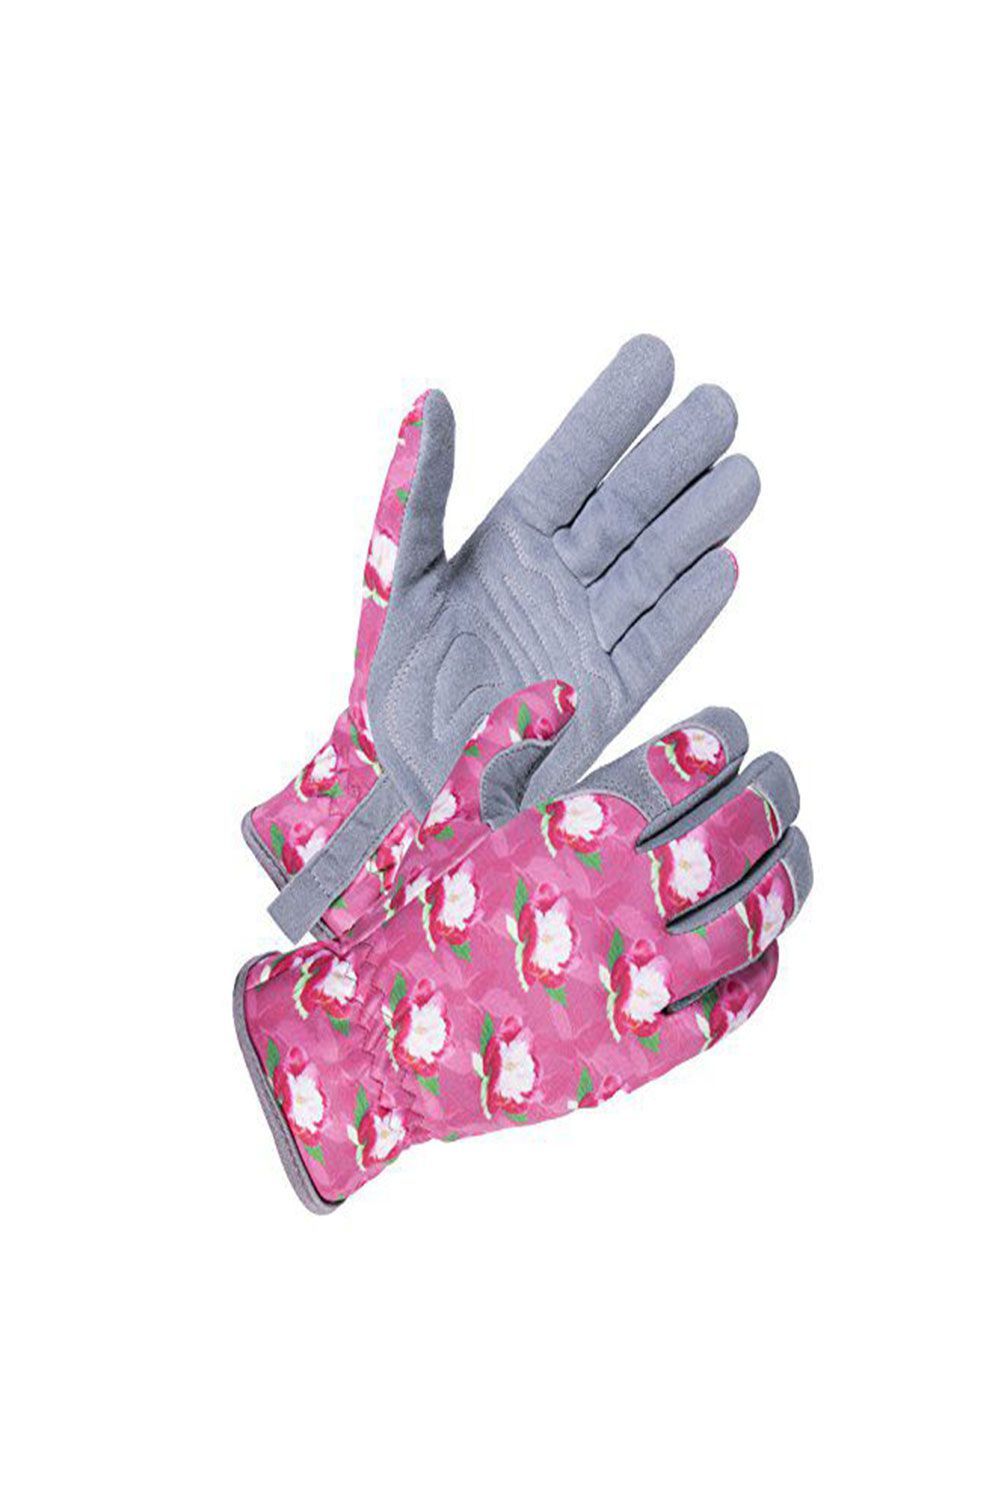 Nice NEW 1 PAIR of HOT PINK POLKA DOT Garden Gloves *thick protective backing 